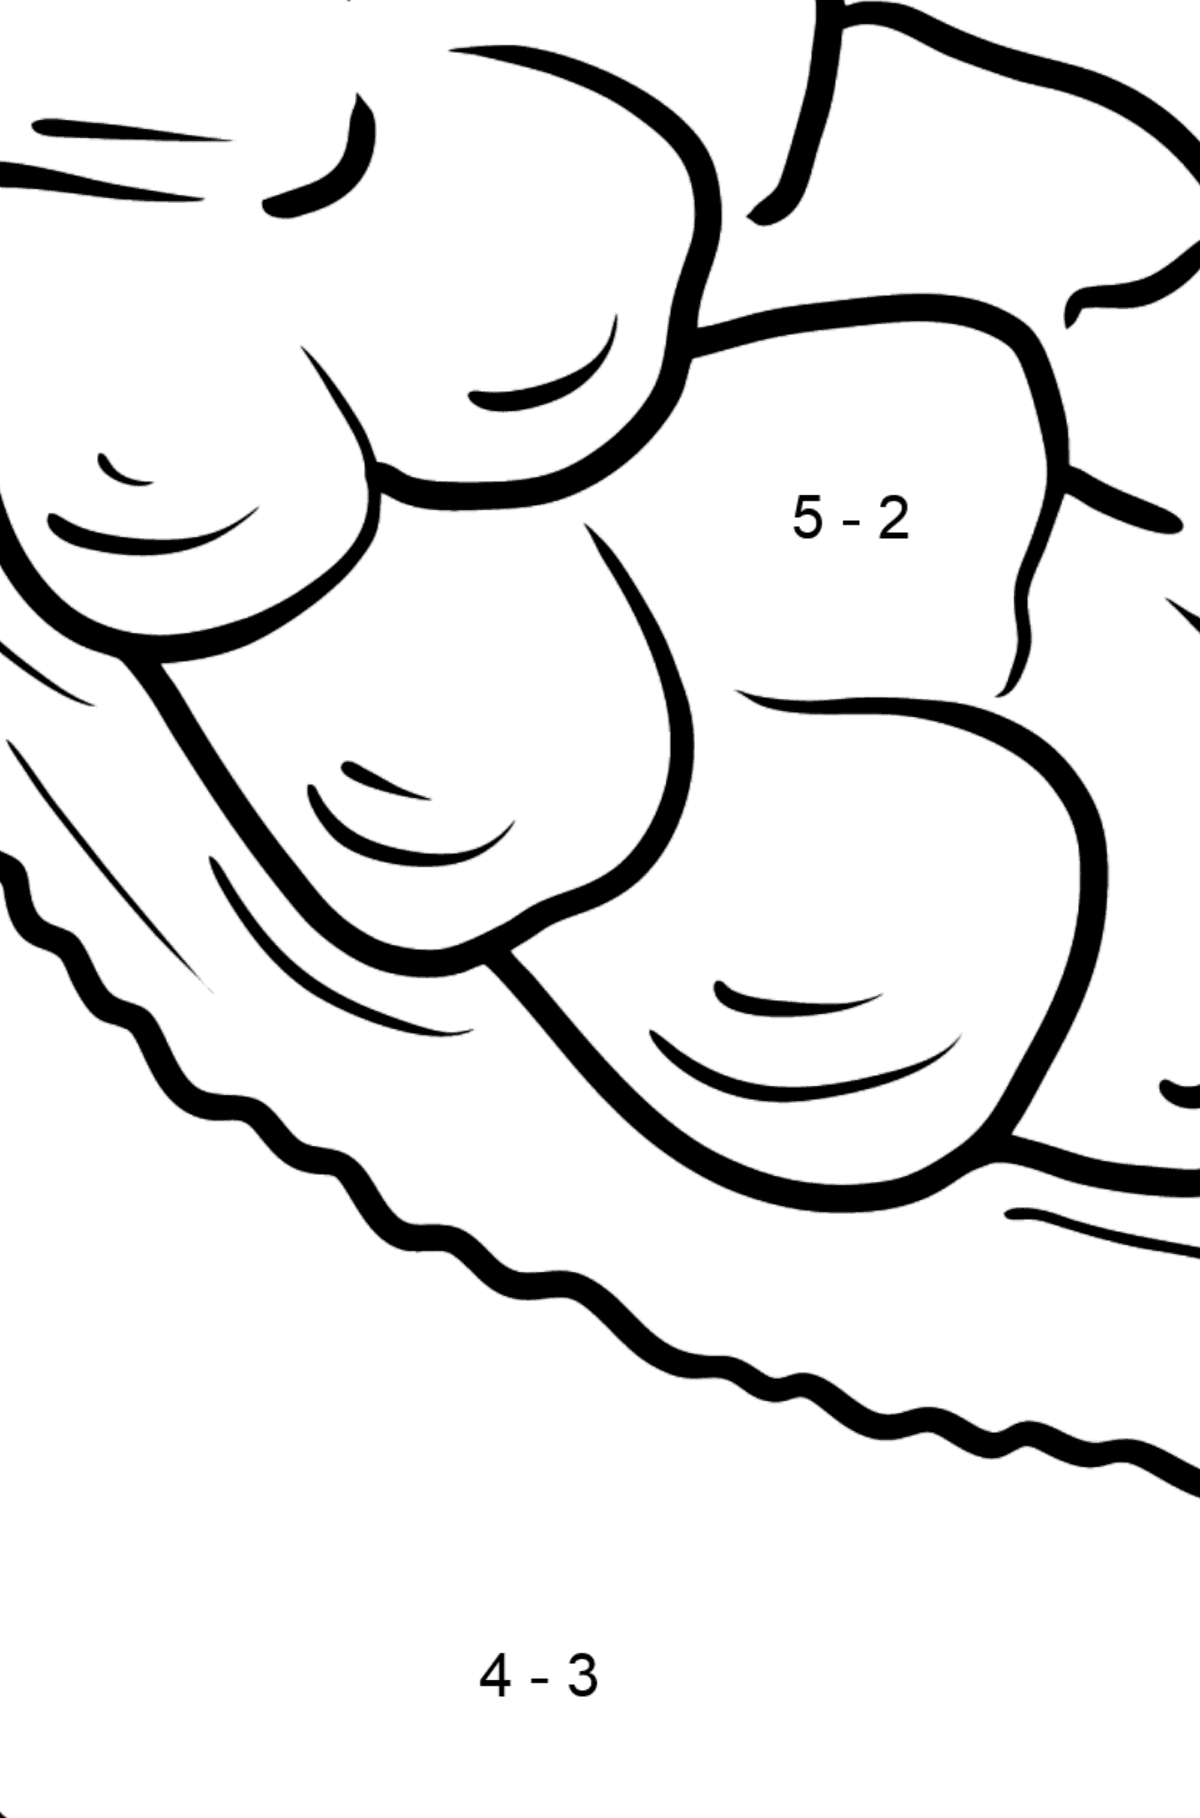 Jackfruit coloring page - Math Coloring - Subtraction for Kids